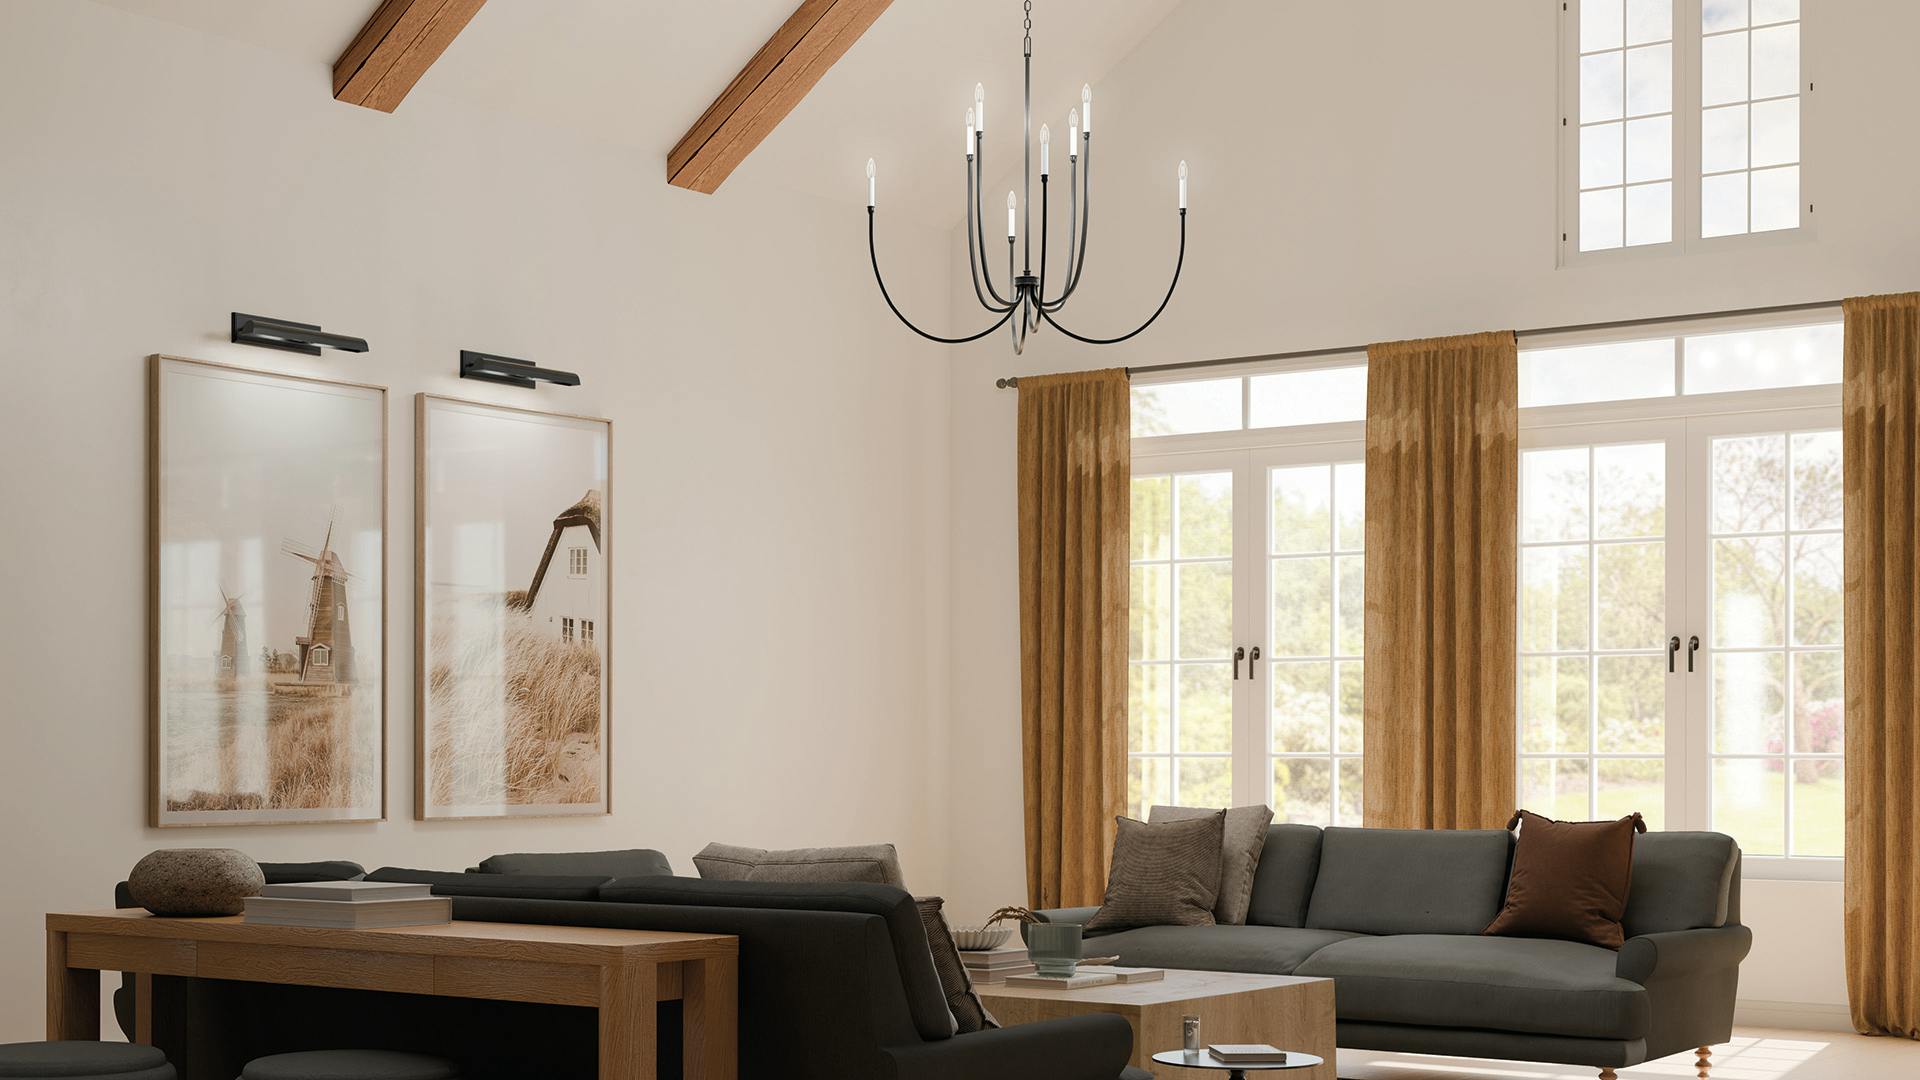 Malene black chandelier hanging over living room during the day